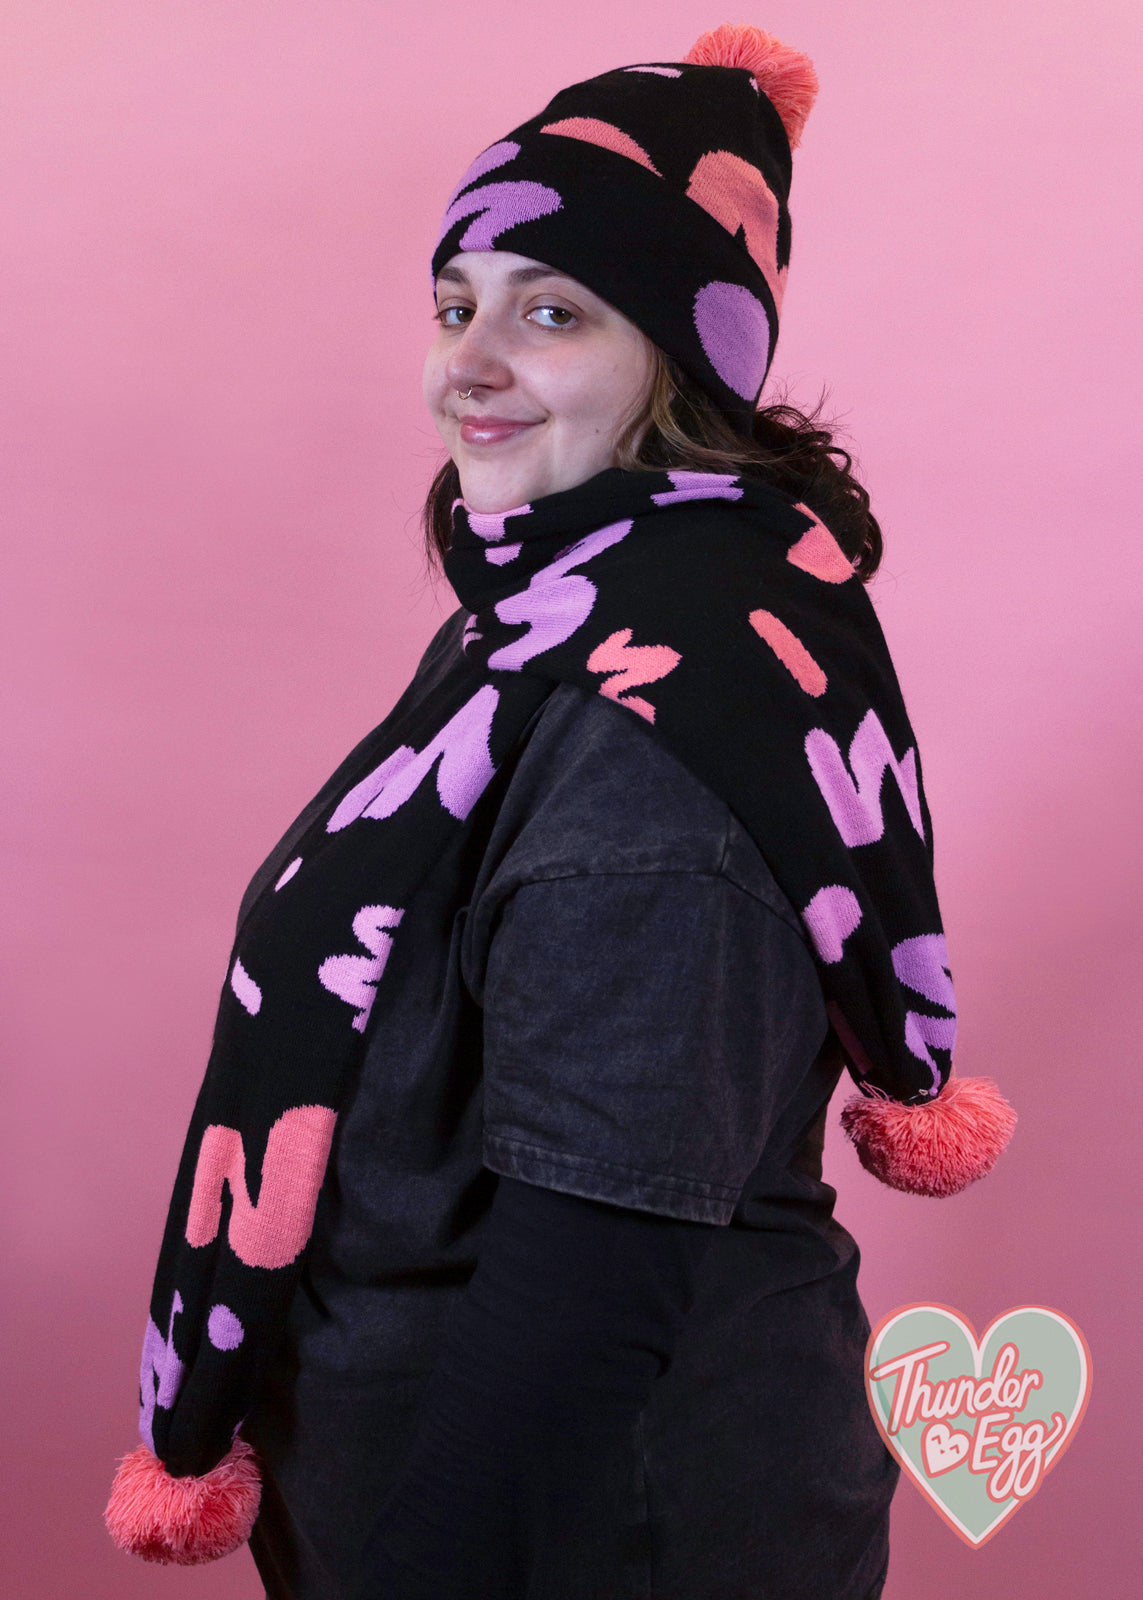 Home of Rainbows - Pink Squiggle Knit Pom Pom Scarf Home of Rainbows - Pink Squiggle Knit Pom Pom Hat